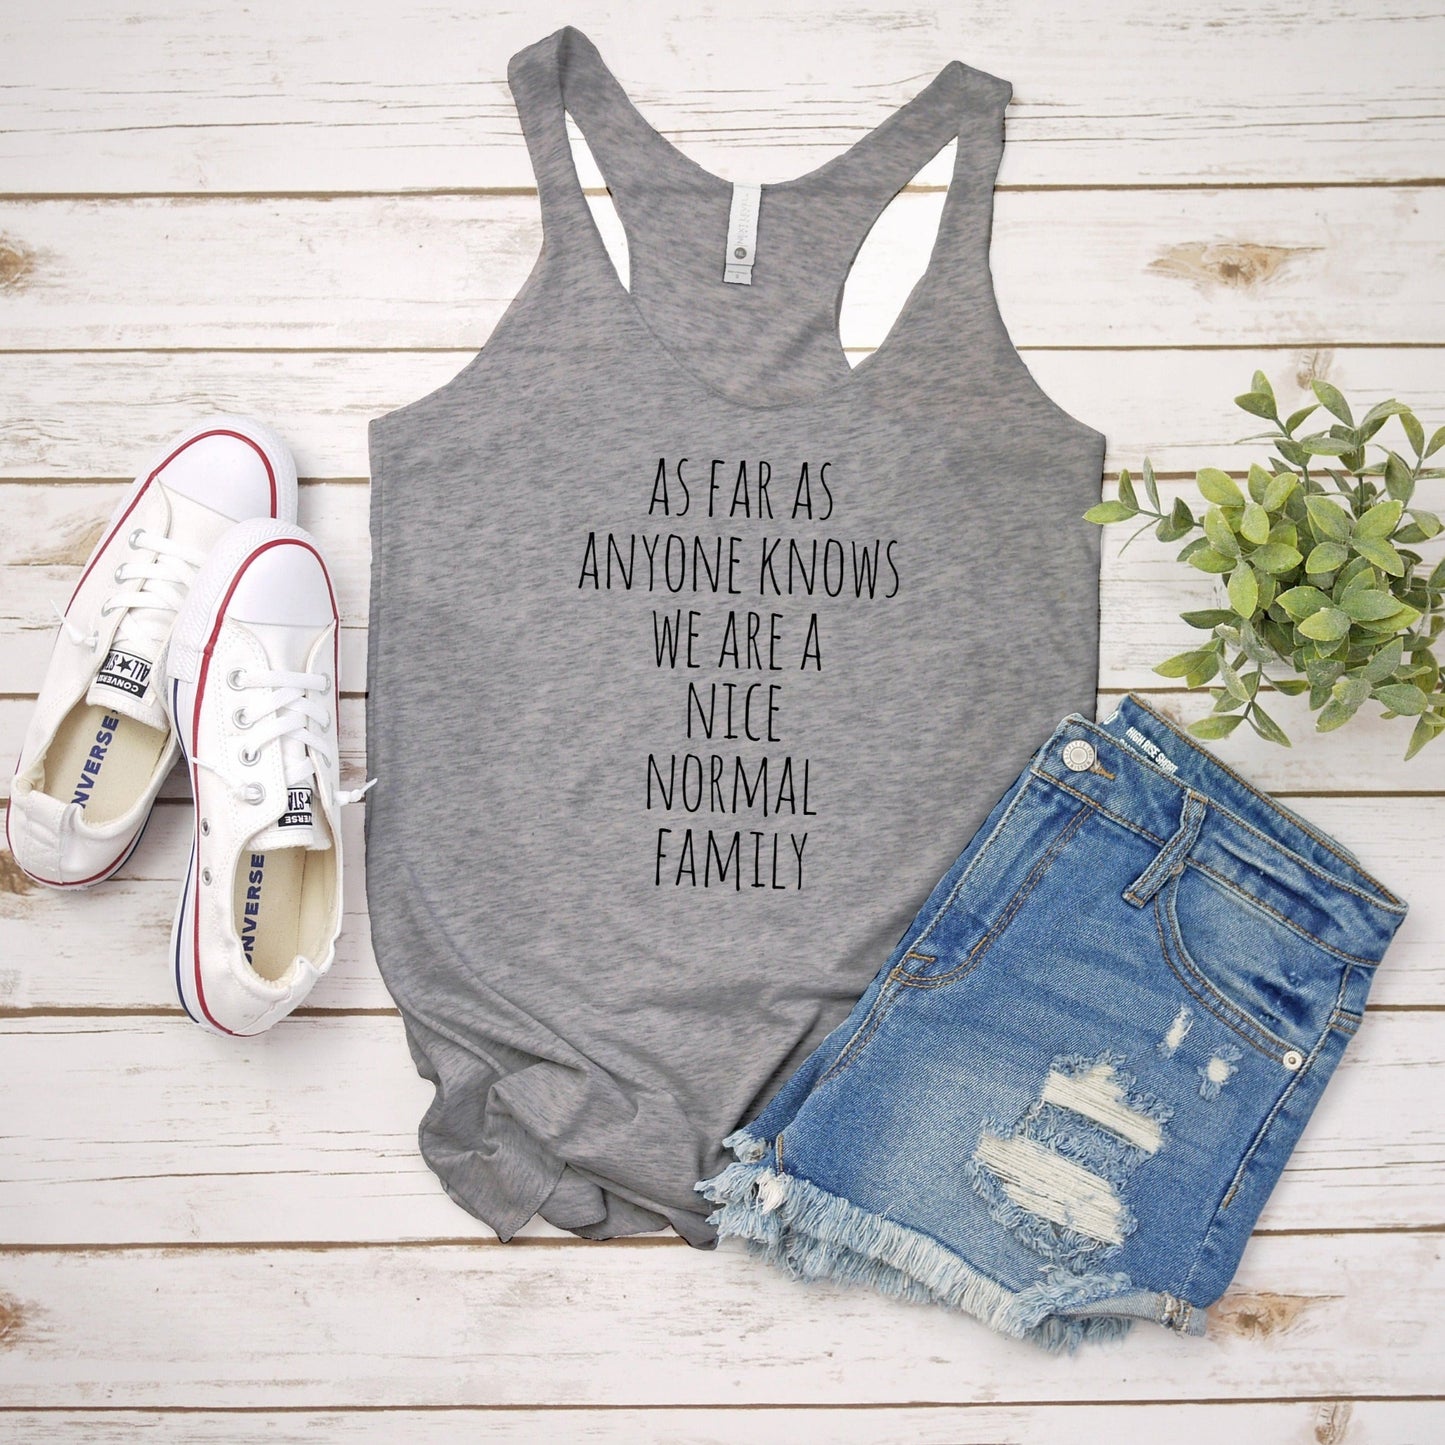 As Far As Anyone Knows We Are A Nice Normal Family - Women's Tank - Heather Gray, Tahiti, or Envy